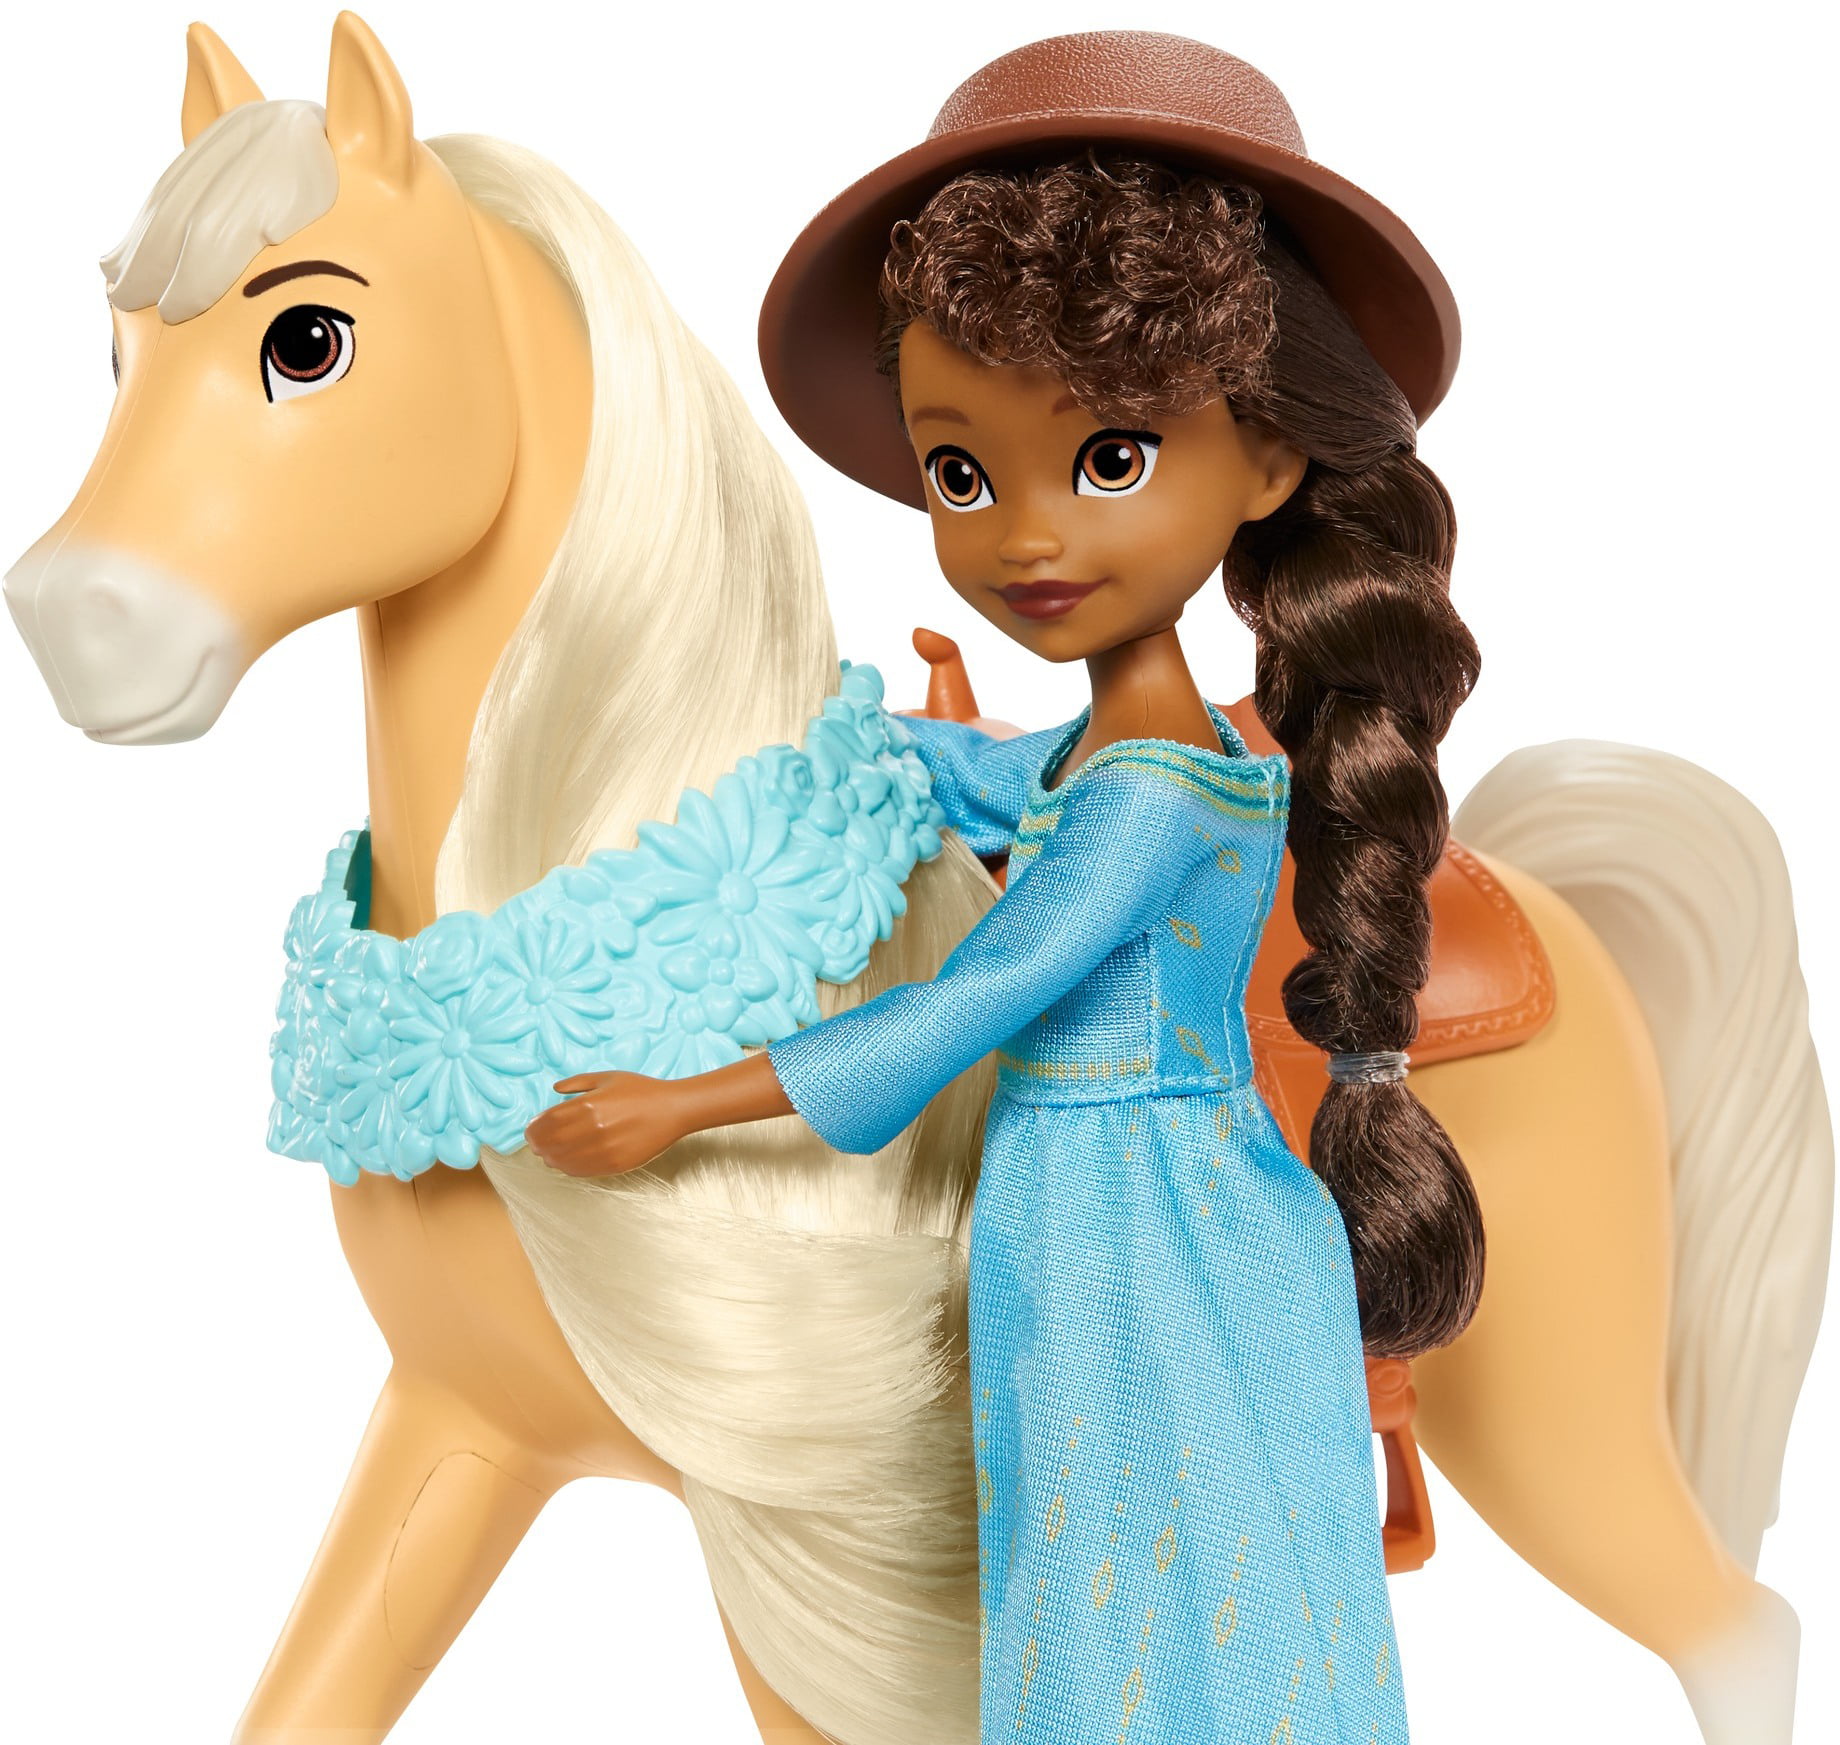 & Chica Linda Horse Brush Great Gift for Ages 3 Years Old & Up Apple Treat 7-in Spirit Untamed PRU Doll 8-in Exclusive Saddle with Long Mane 